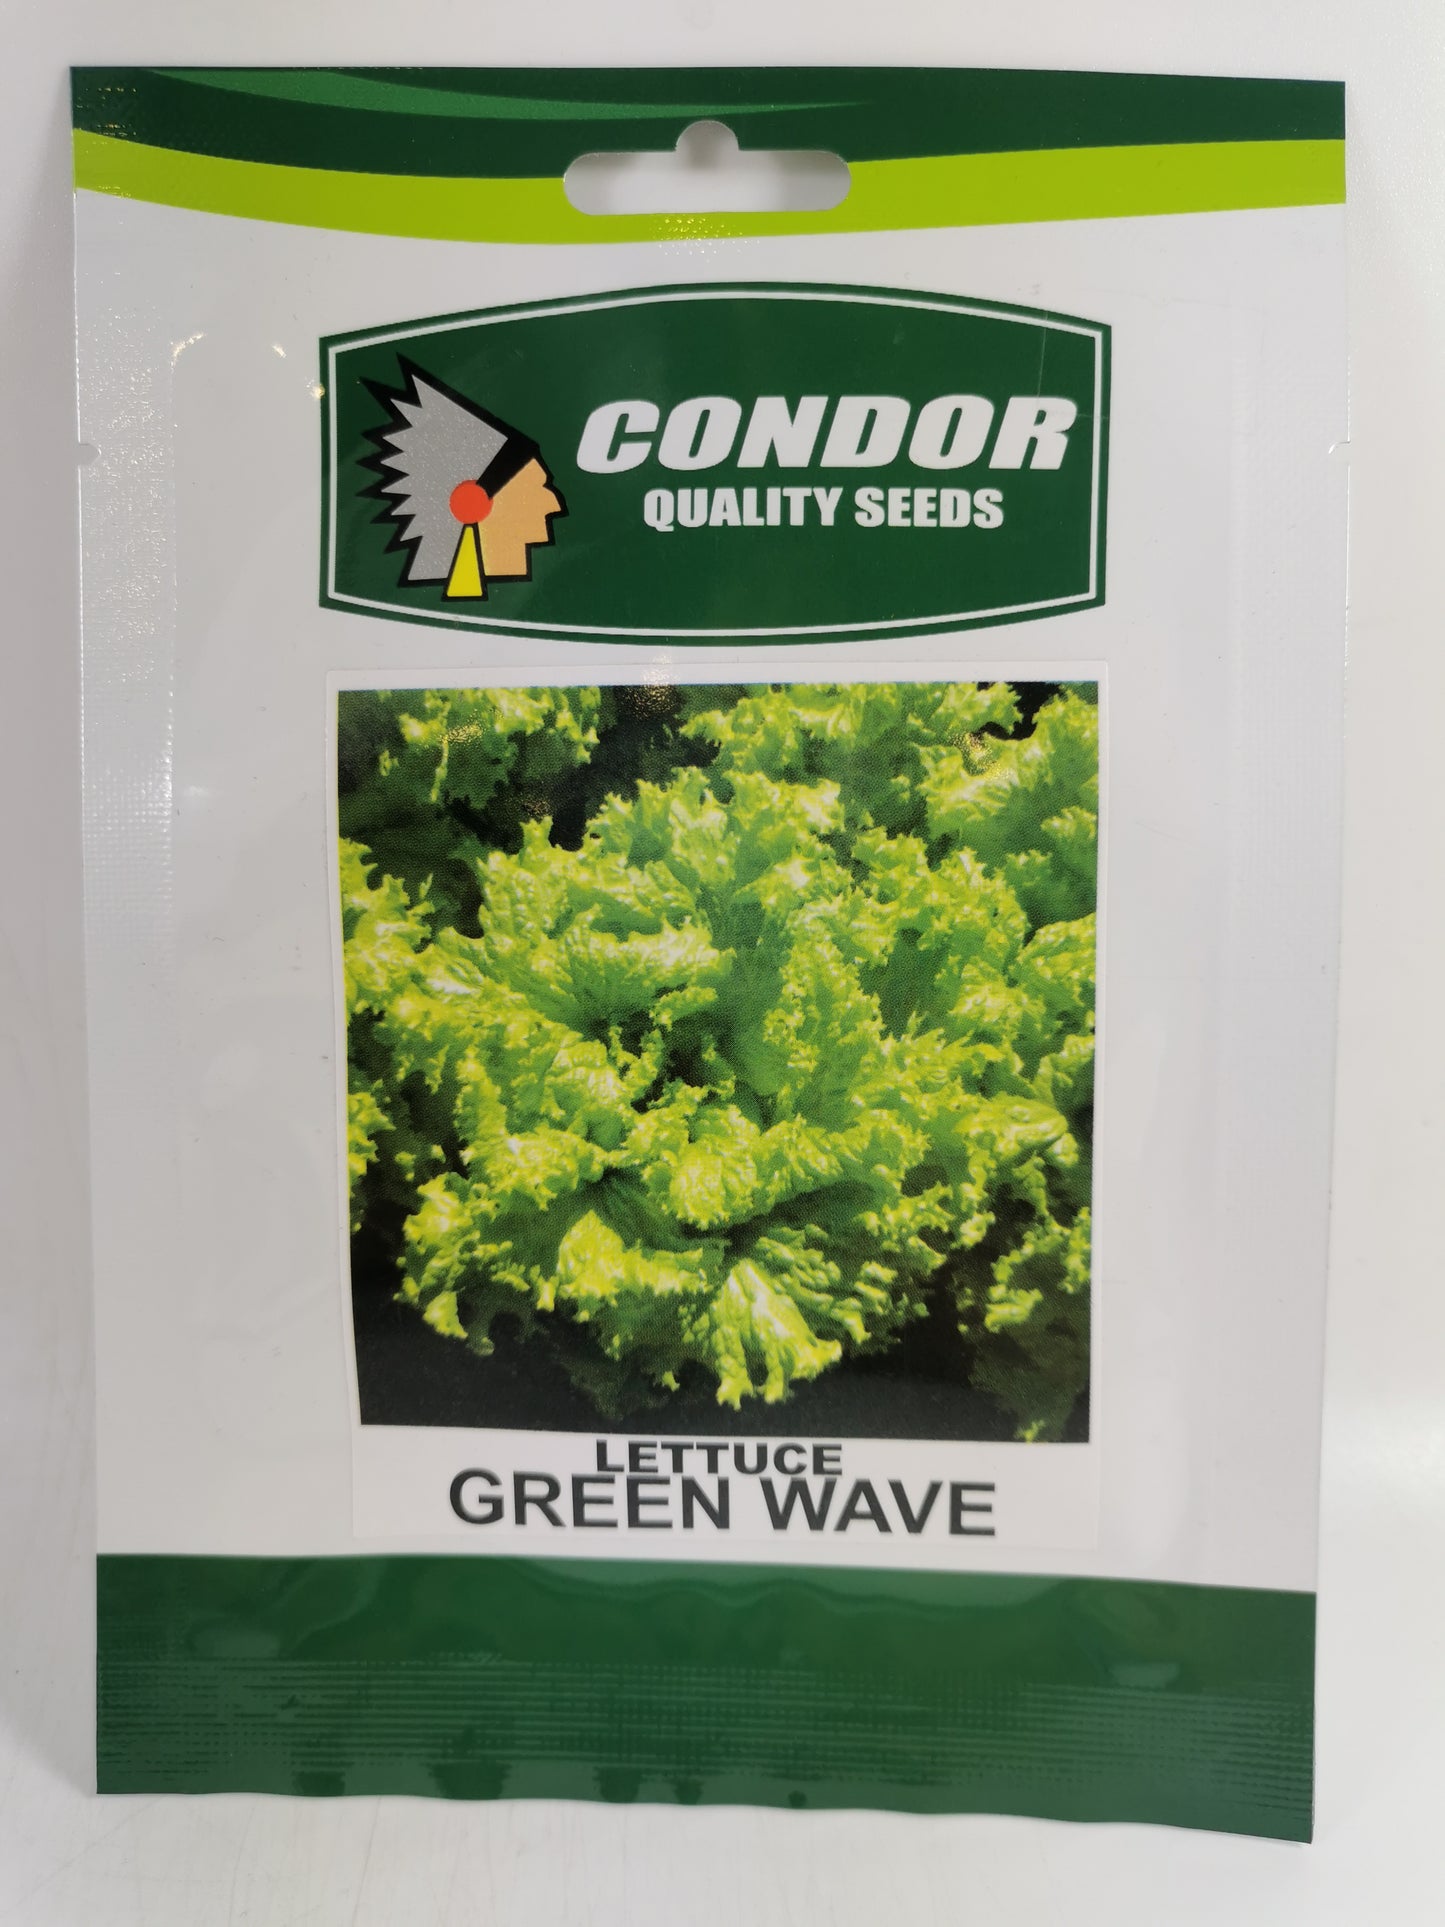 Condor Quality Seeds Lettuce Green Wave